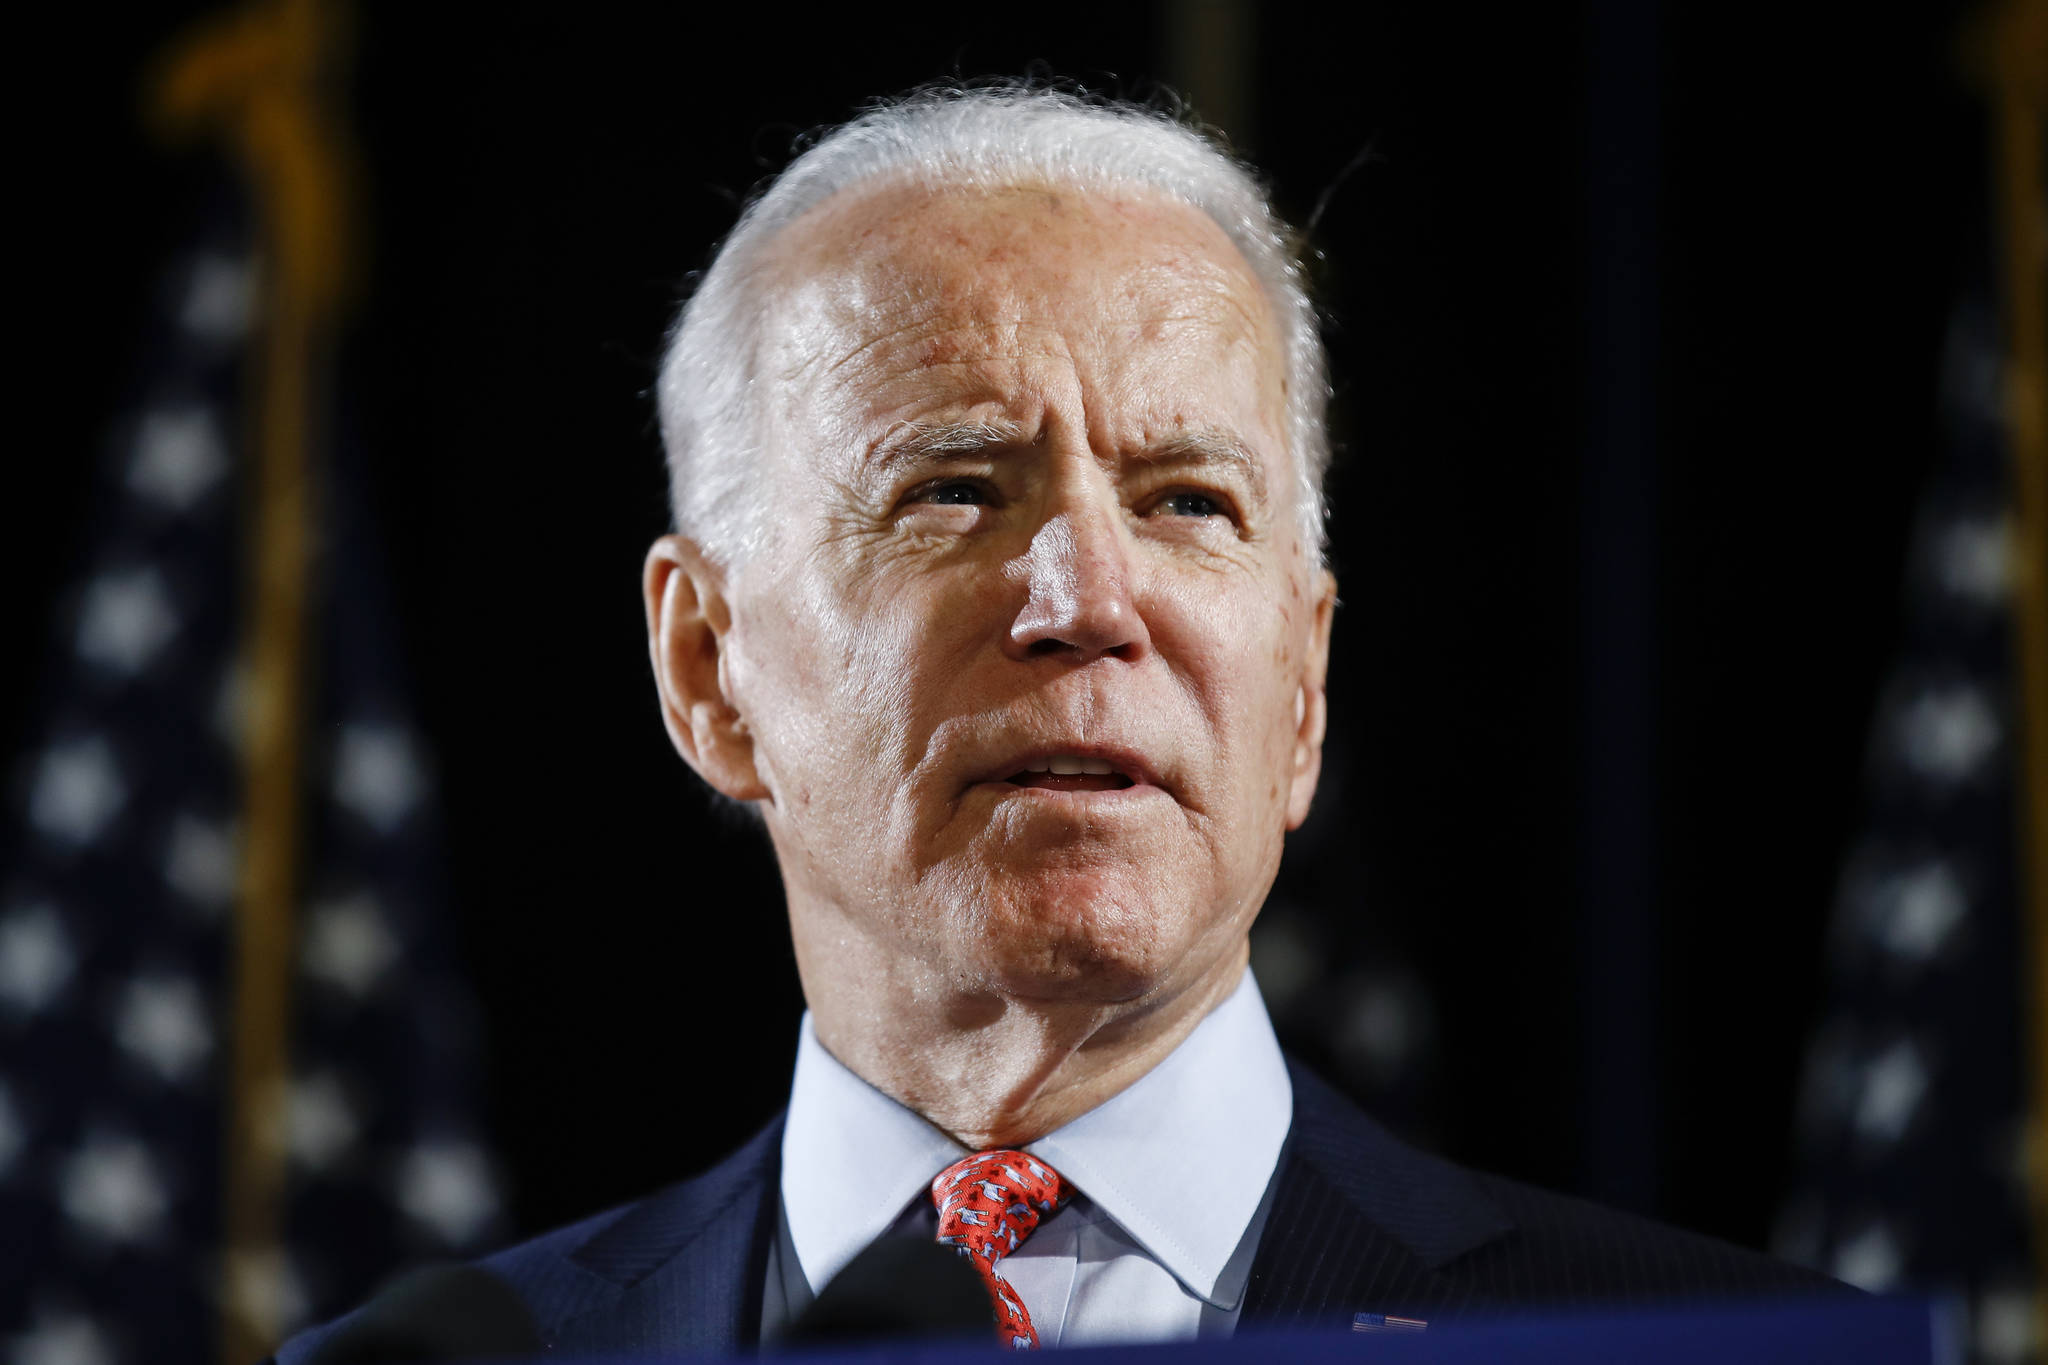 In this March 12, 2020, photo, Democratic presidential candidate former Vice President Joe Biden speaks in Wilmington, Del. Biden has won the Alaska Democrats’ party-run presidential primary, defeating Sen. Bernie Sanders on Saturday, April 11, days after Sanders suspended his campaign. (AP Photo | Matt Rourke, File)